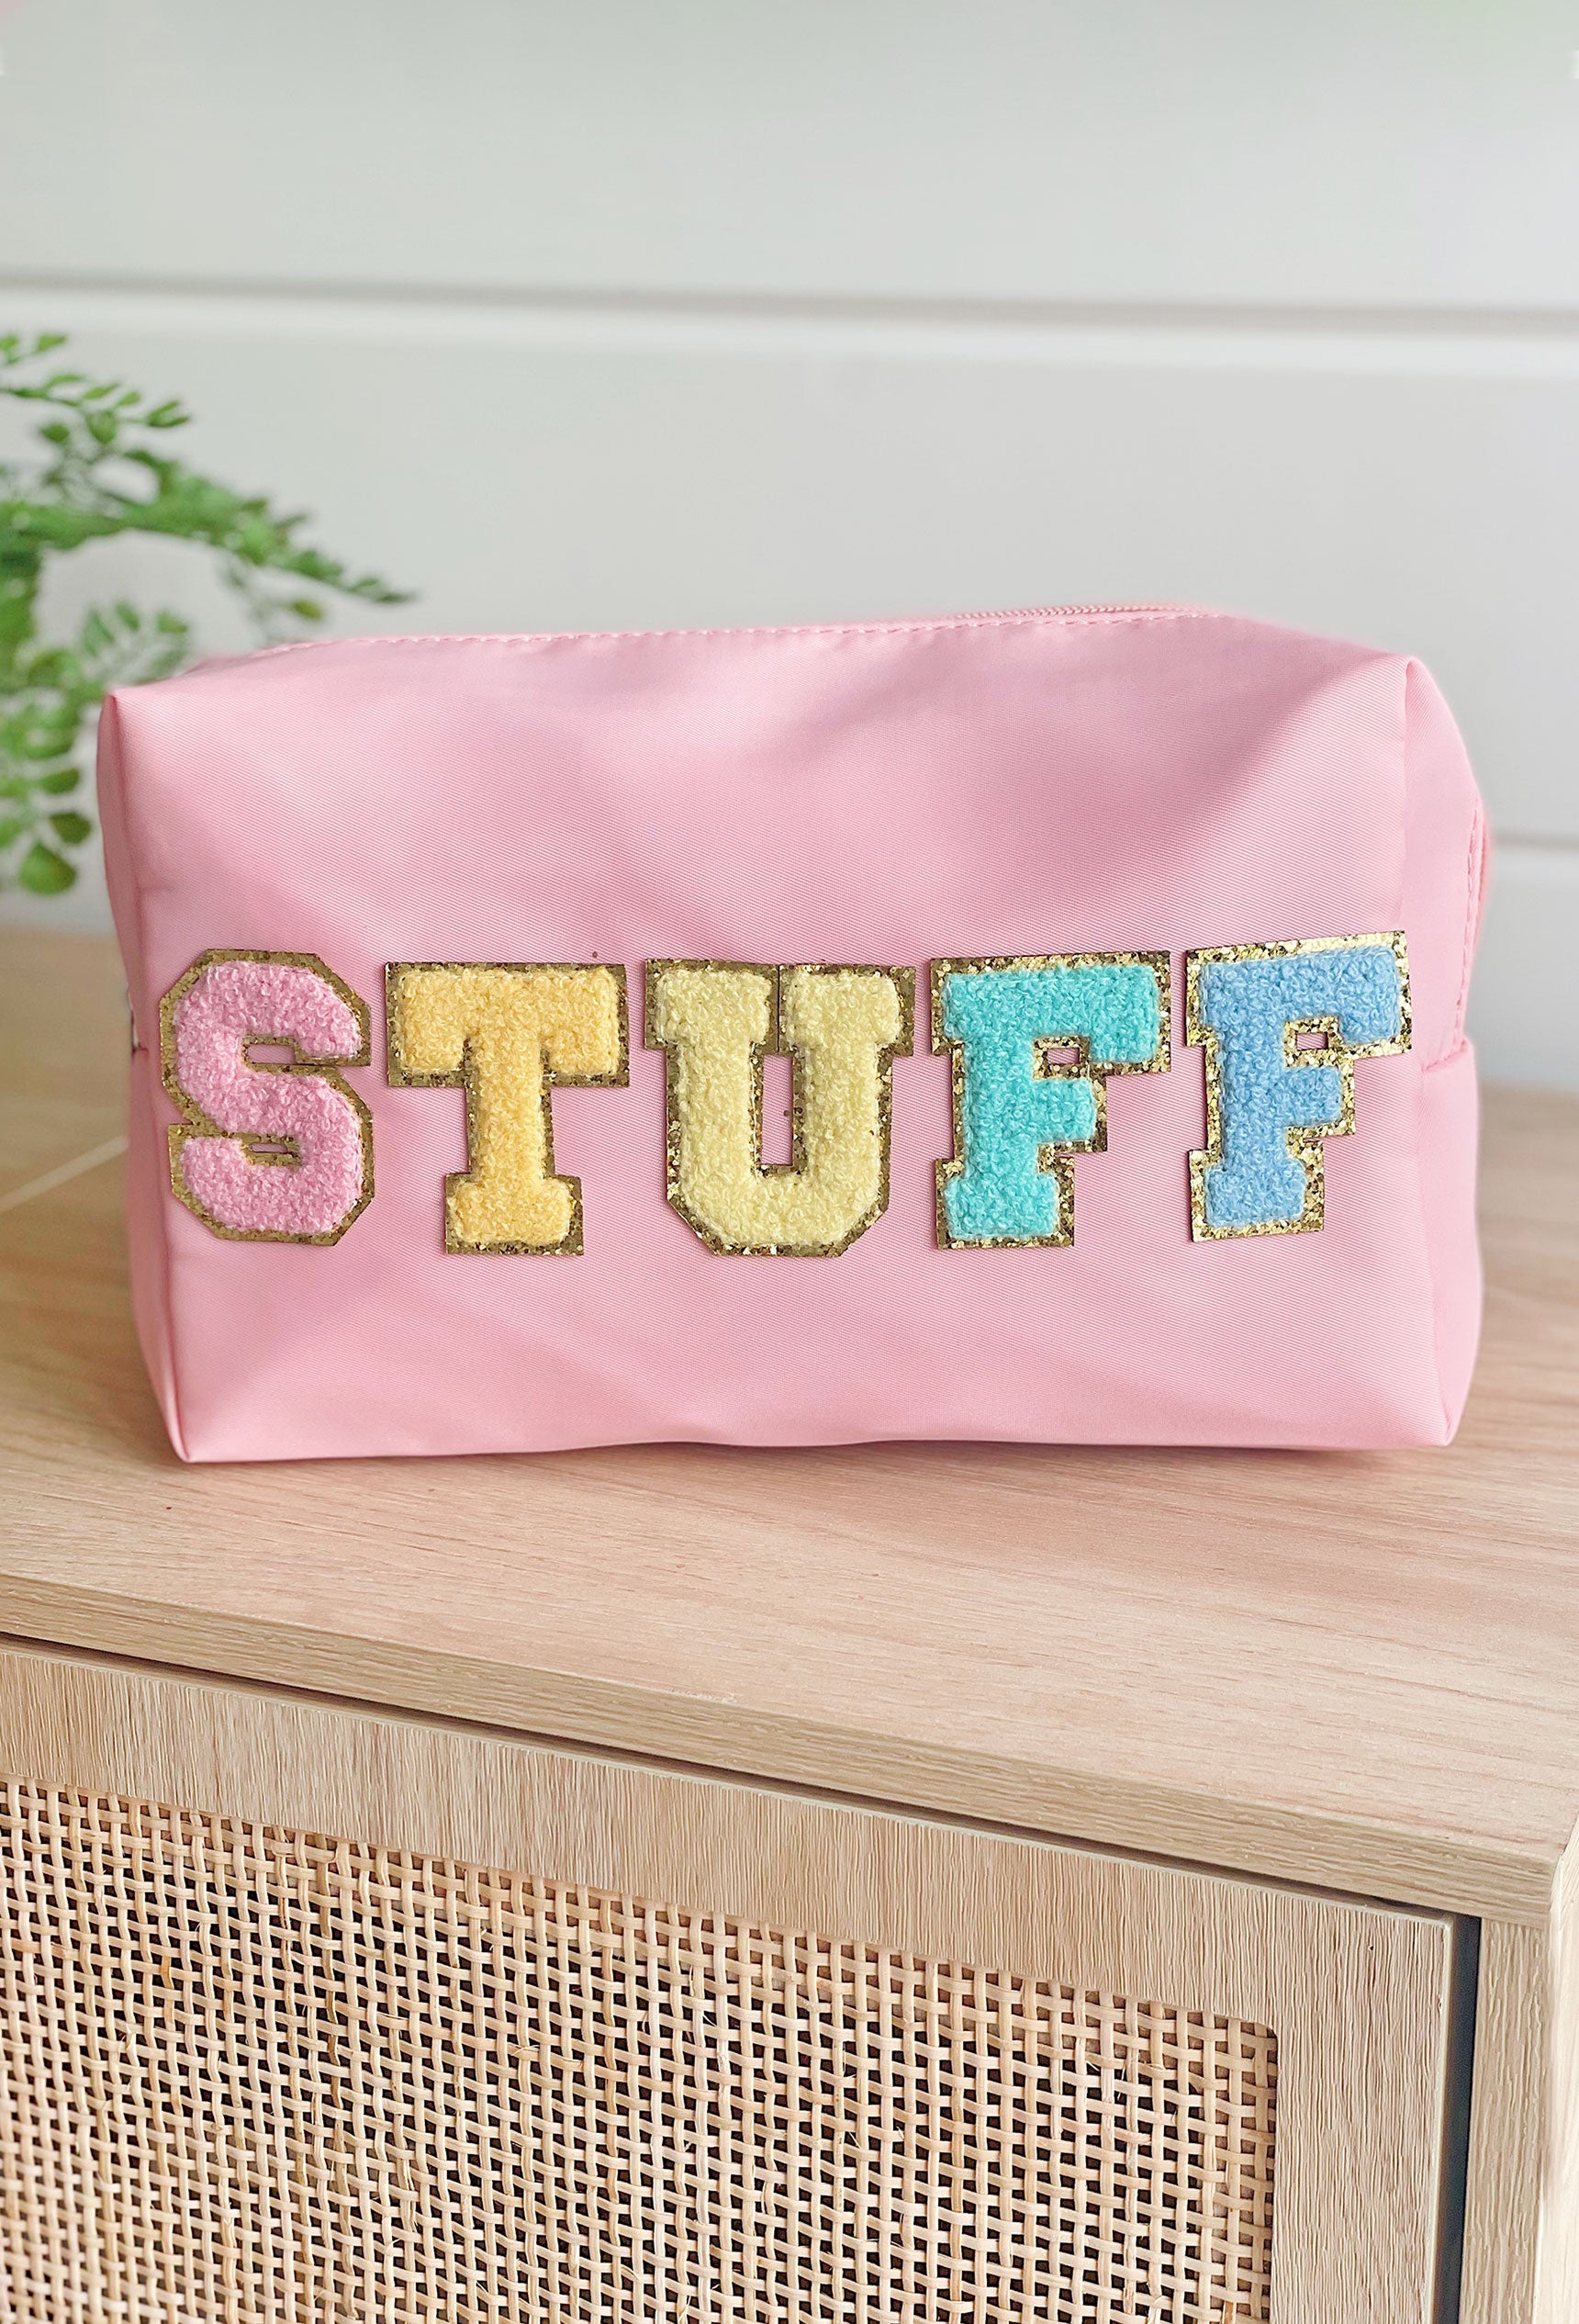 Stuff Cosmetic Bag in Pink, Pink nylon cosmetic bag with "stuff" printed in a colorful textured font